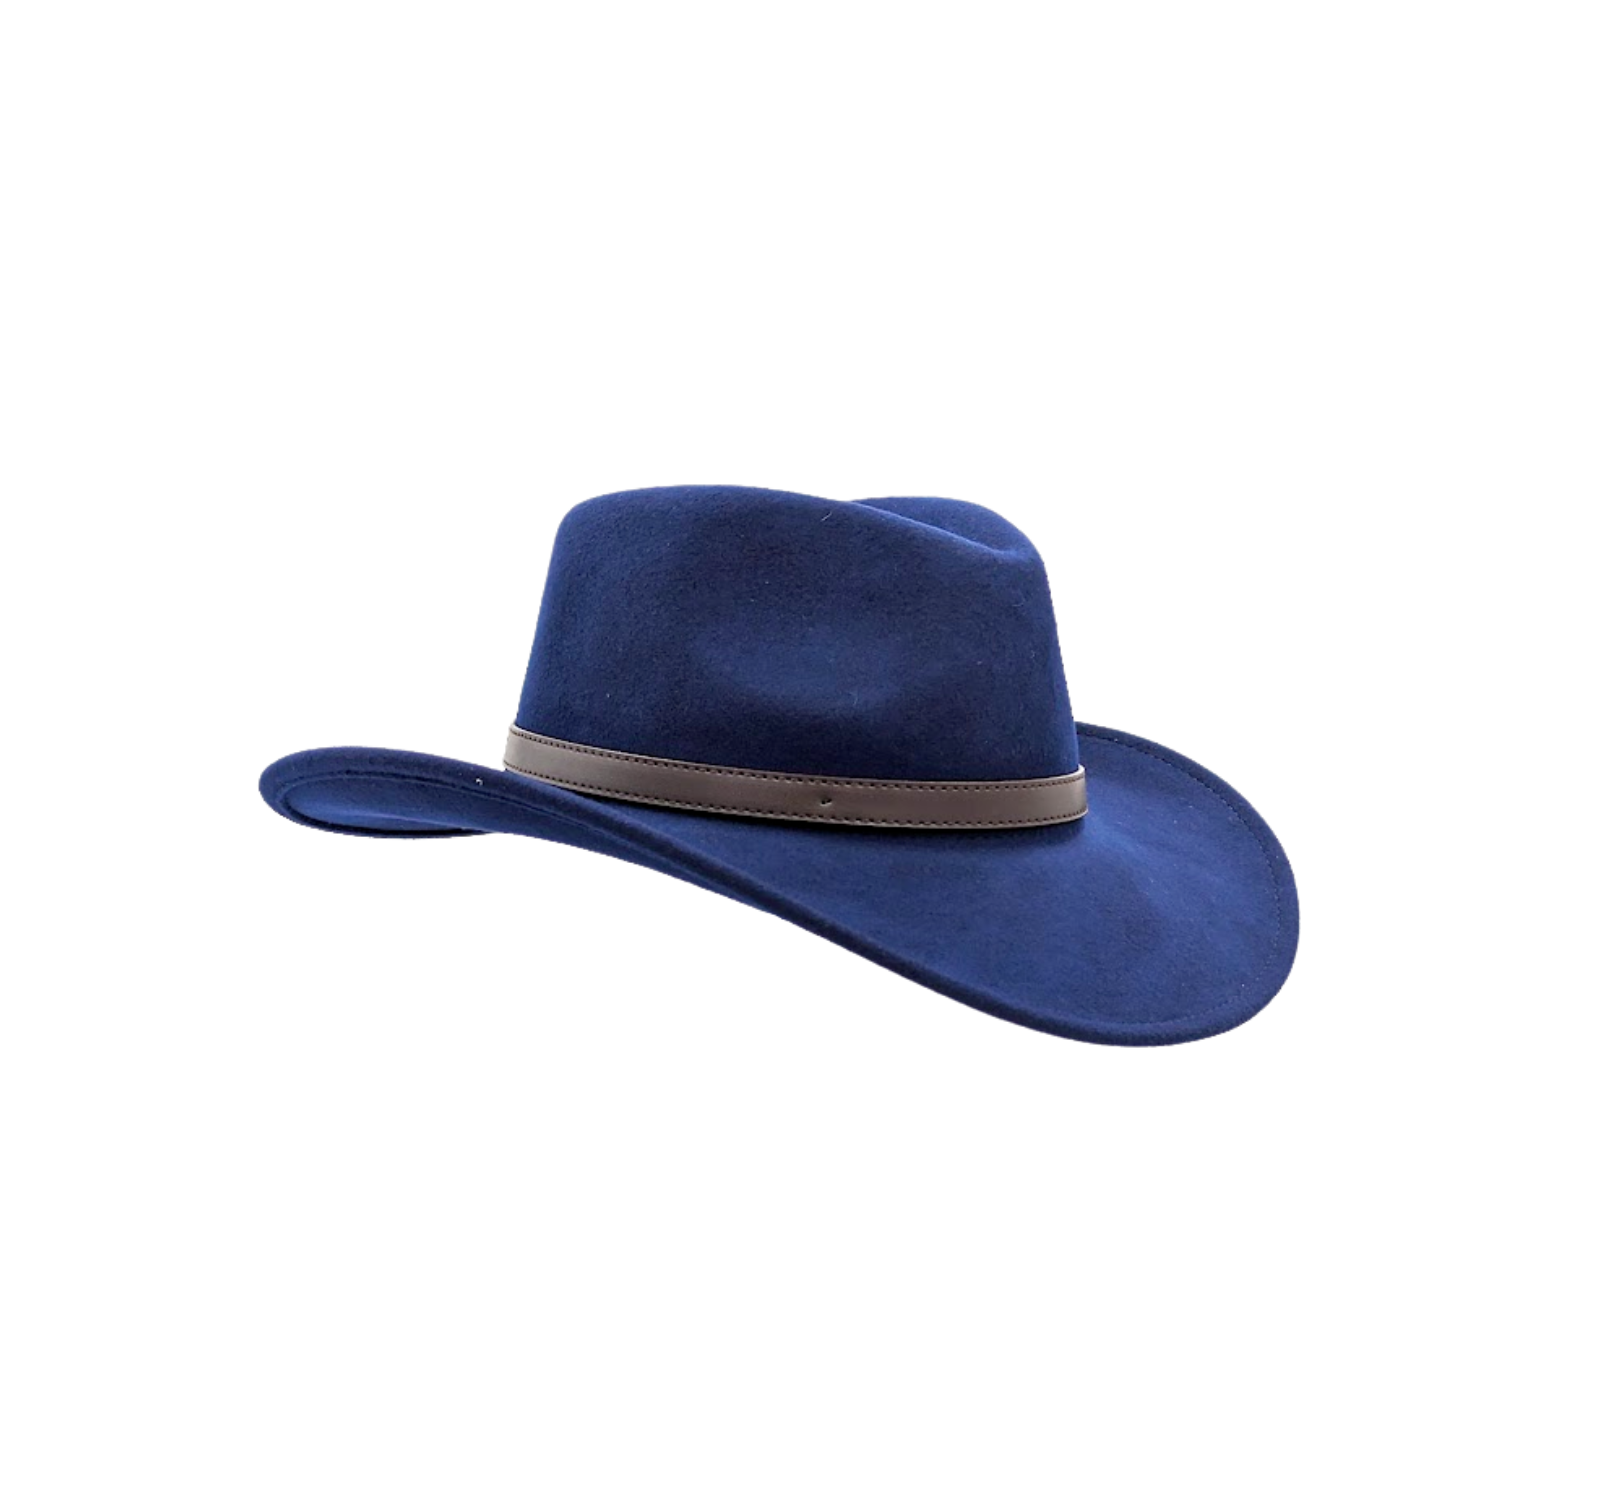 Stansmore Leather Cowboy Hat